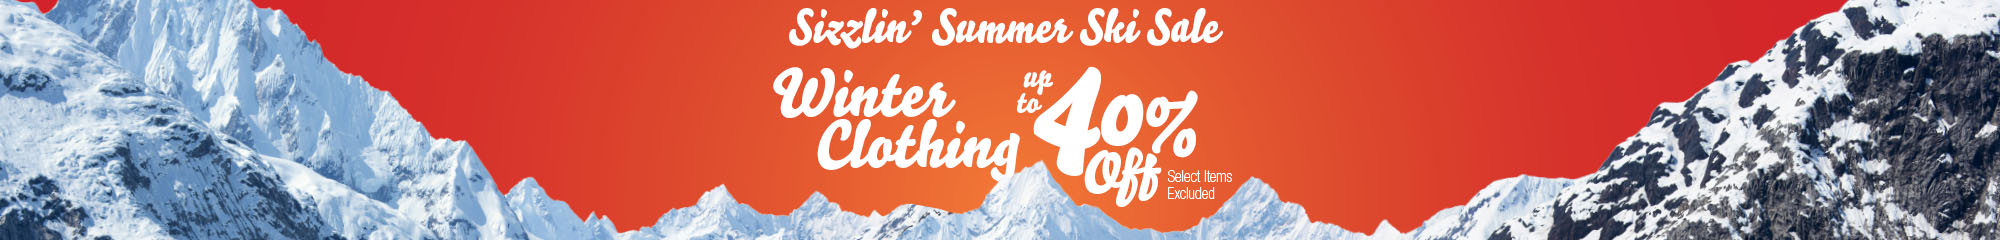 Up to 40% off Winter Clothing